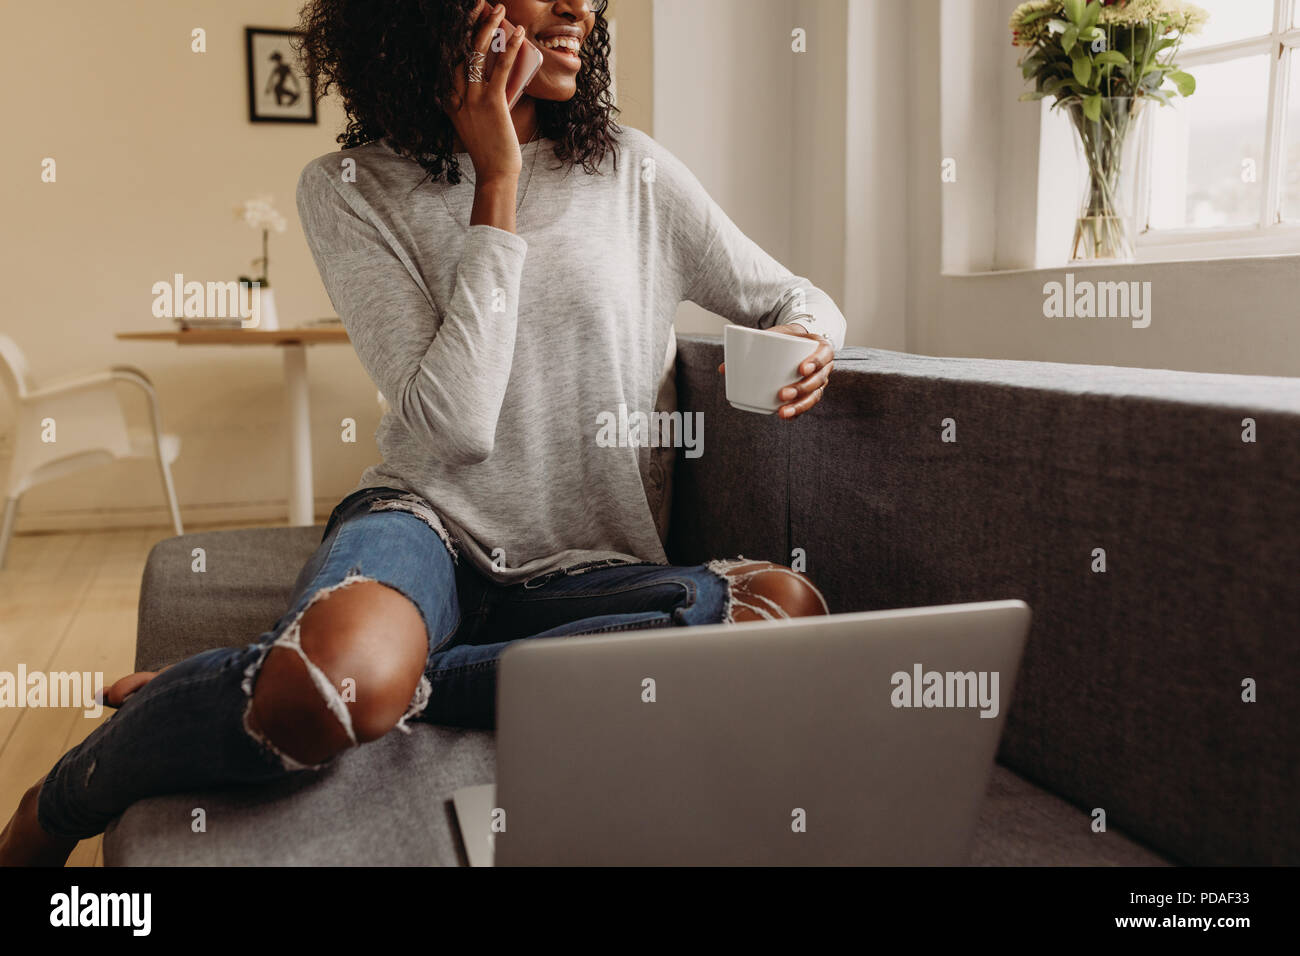 Businesswoman sitting on sofa at home and talking over mobile phone while working on laptop. Smiling woman in fashionable torn jeans holding a coffee  Stock Photo